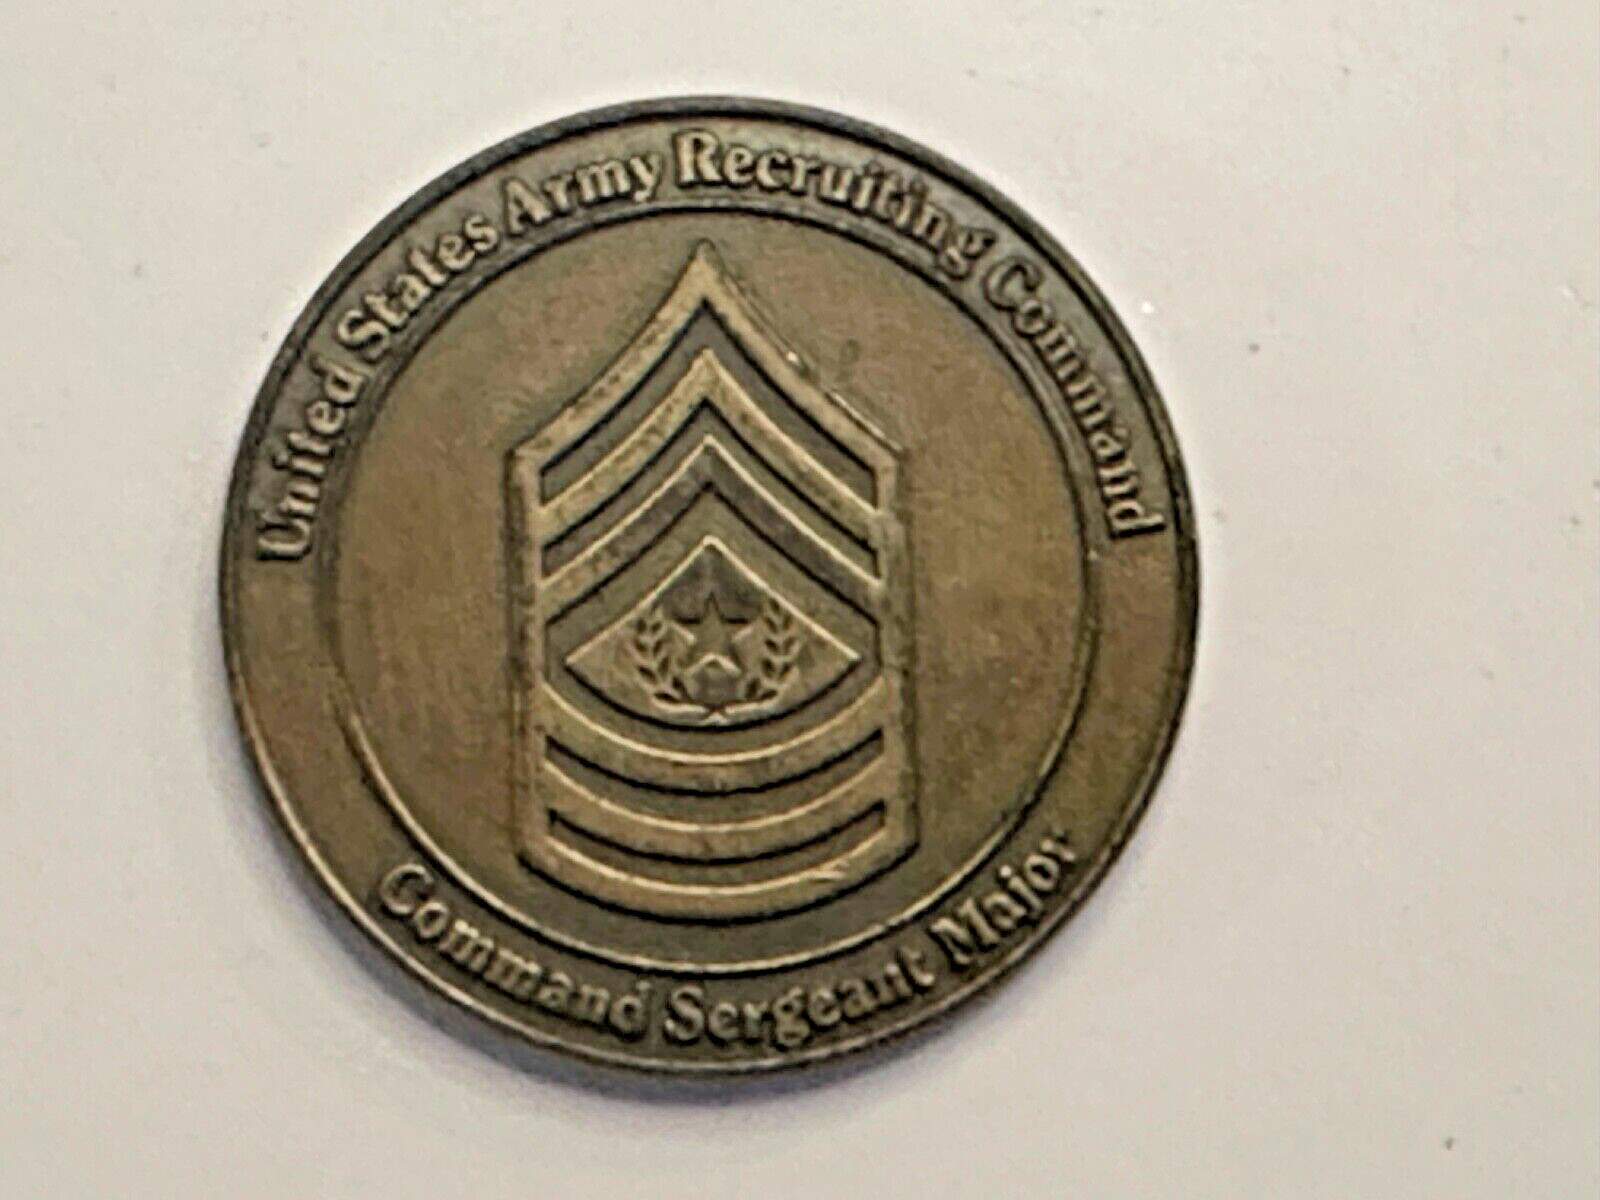 RARE Vintage Command Sergeant Major CSM Recruiting Command Challenge Coin